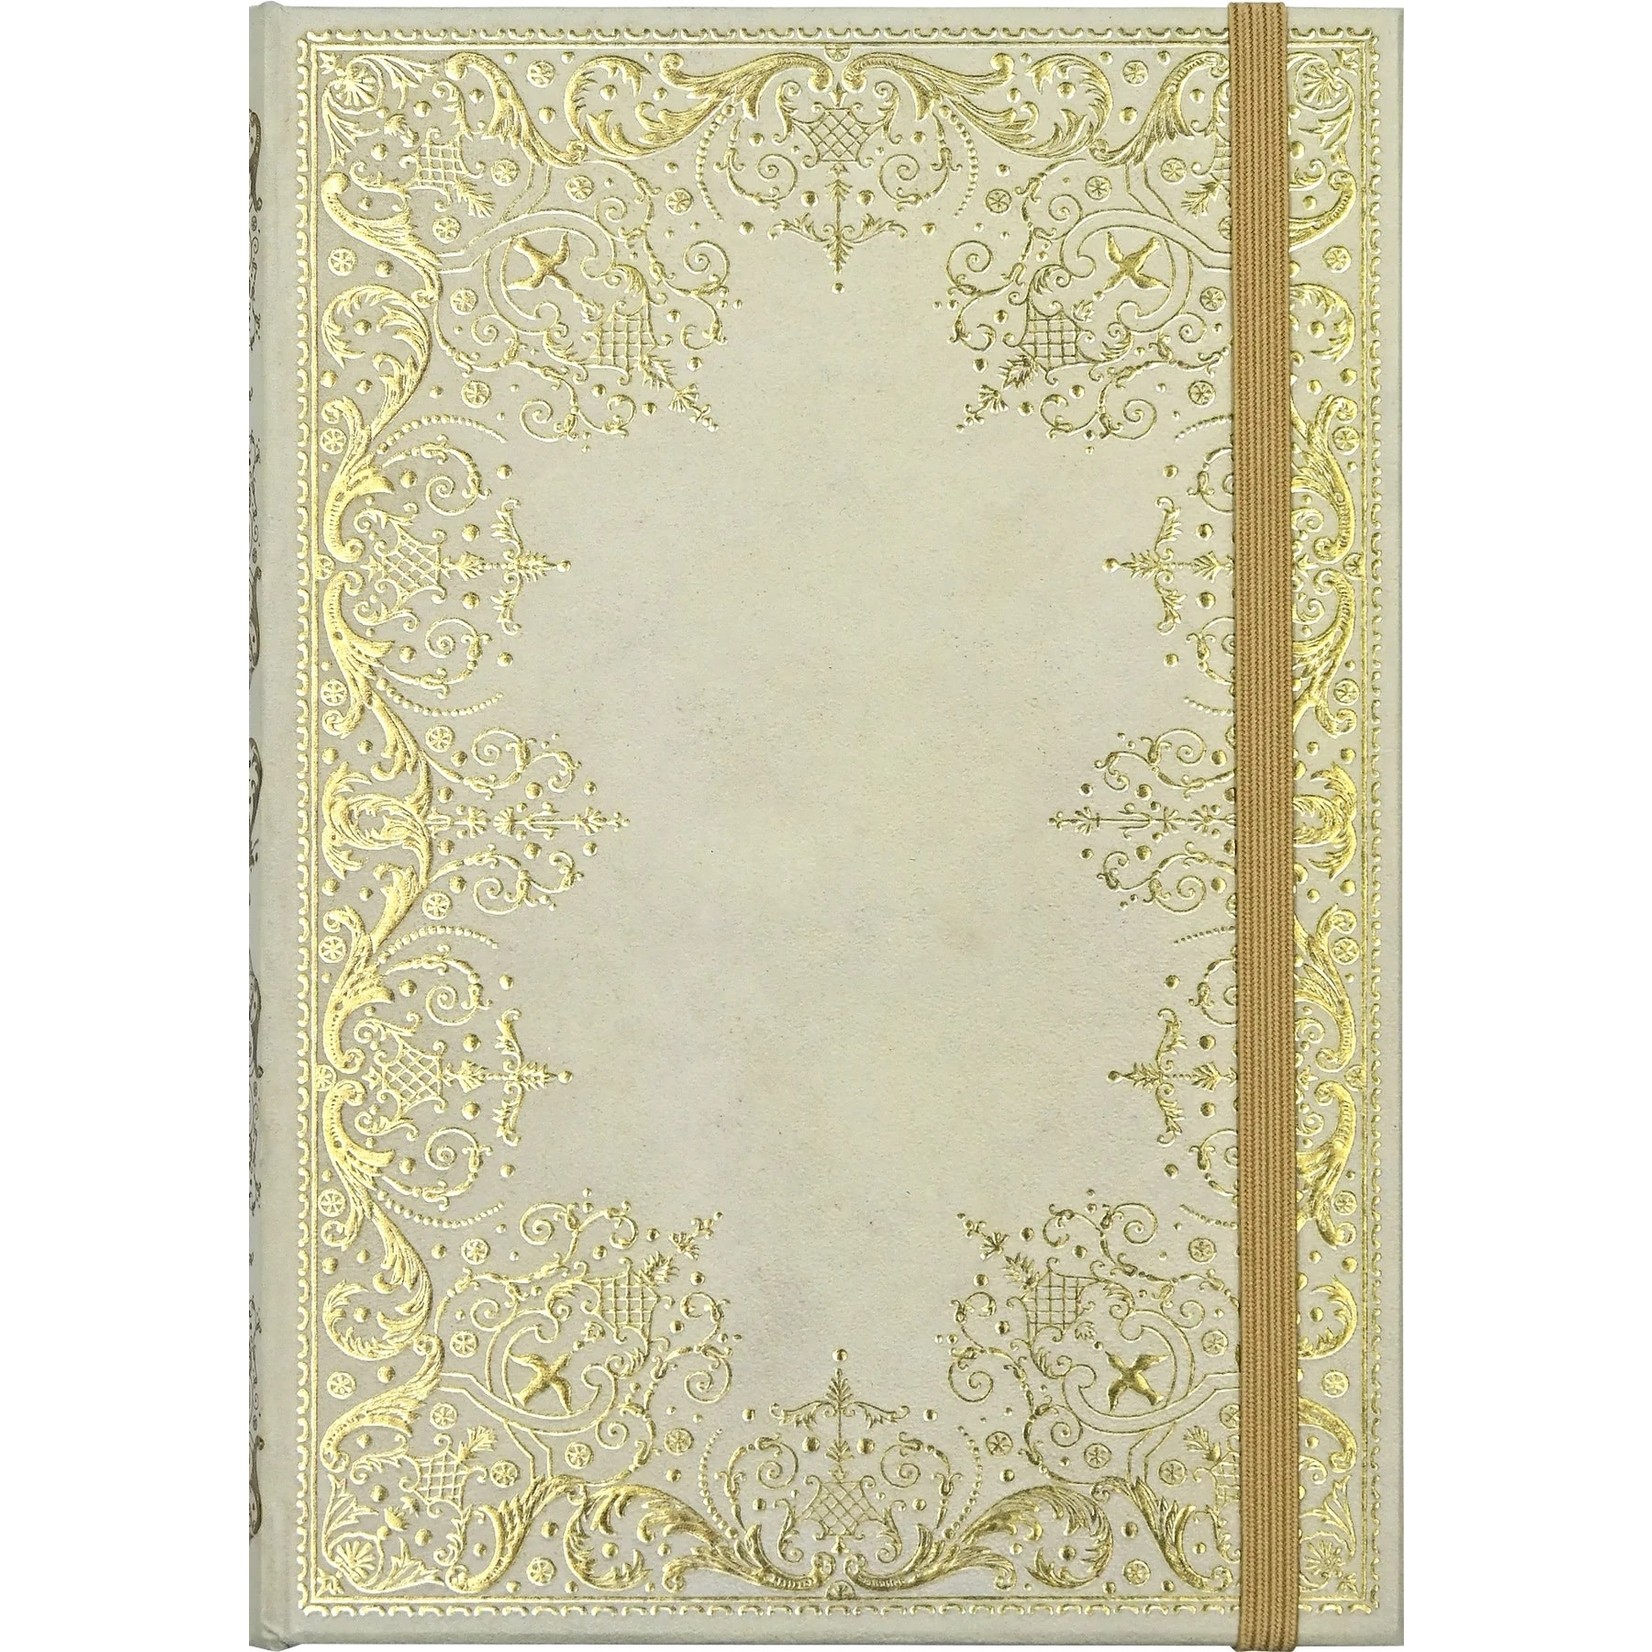 Peter Pauper Press Small Journal: Gilded Ivory